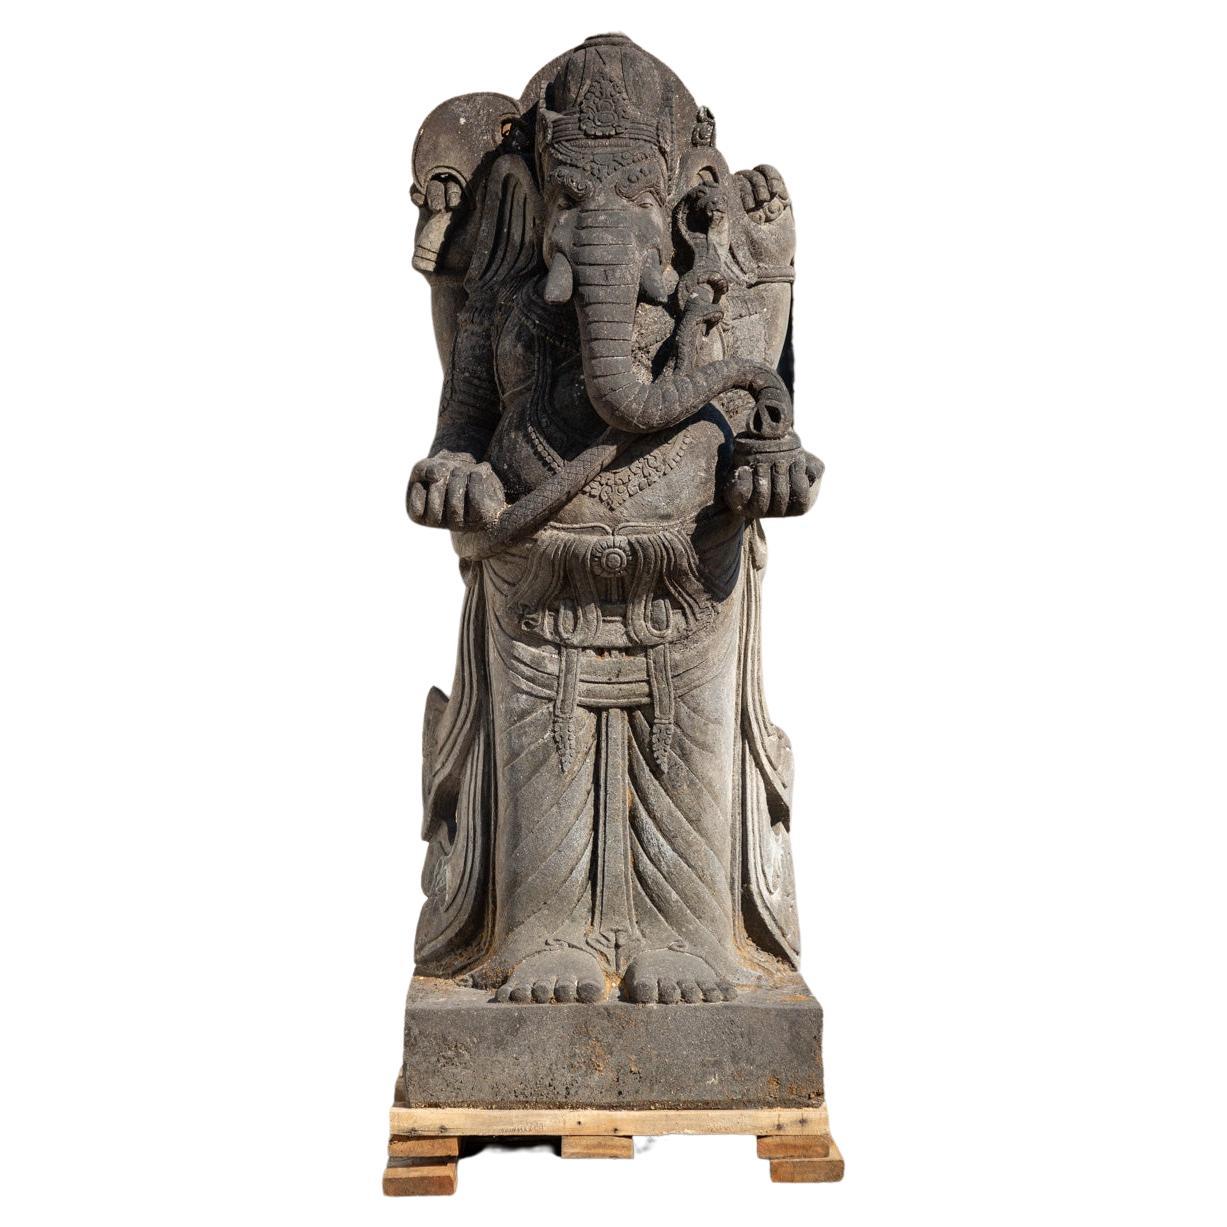 Middle 20th century Large and special lavastone Ganesha statue from Indonesia